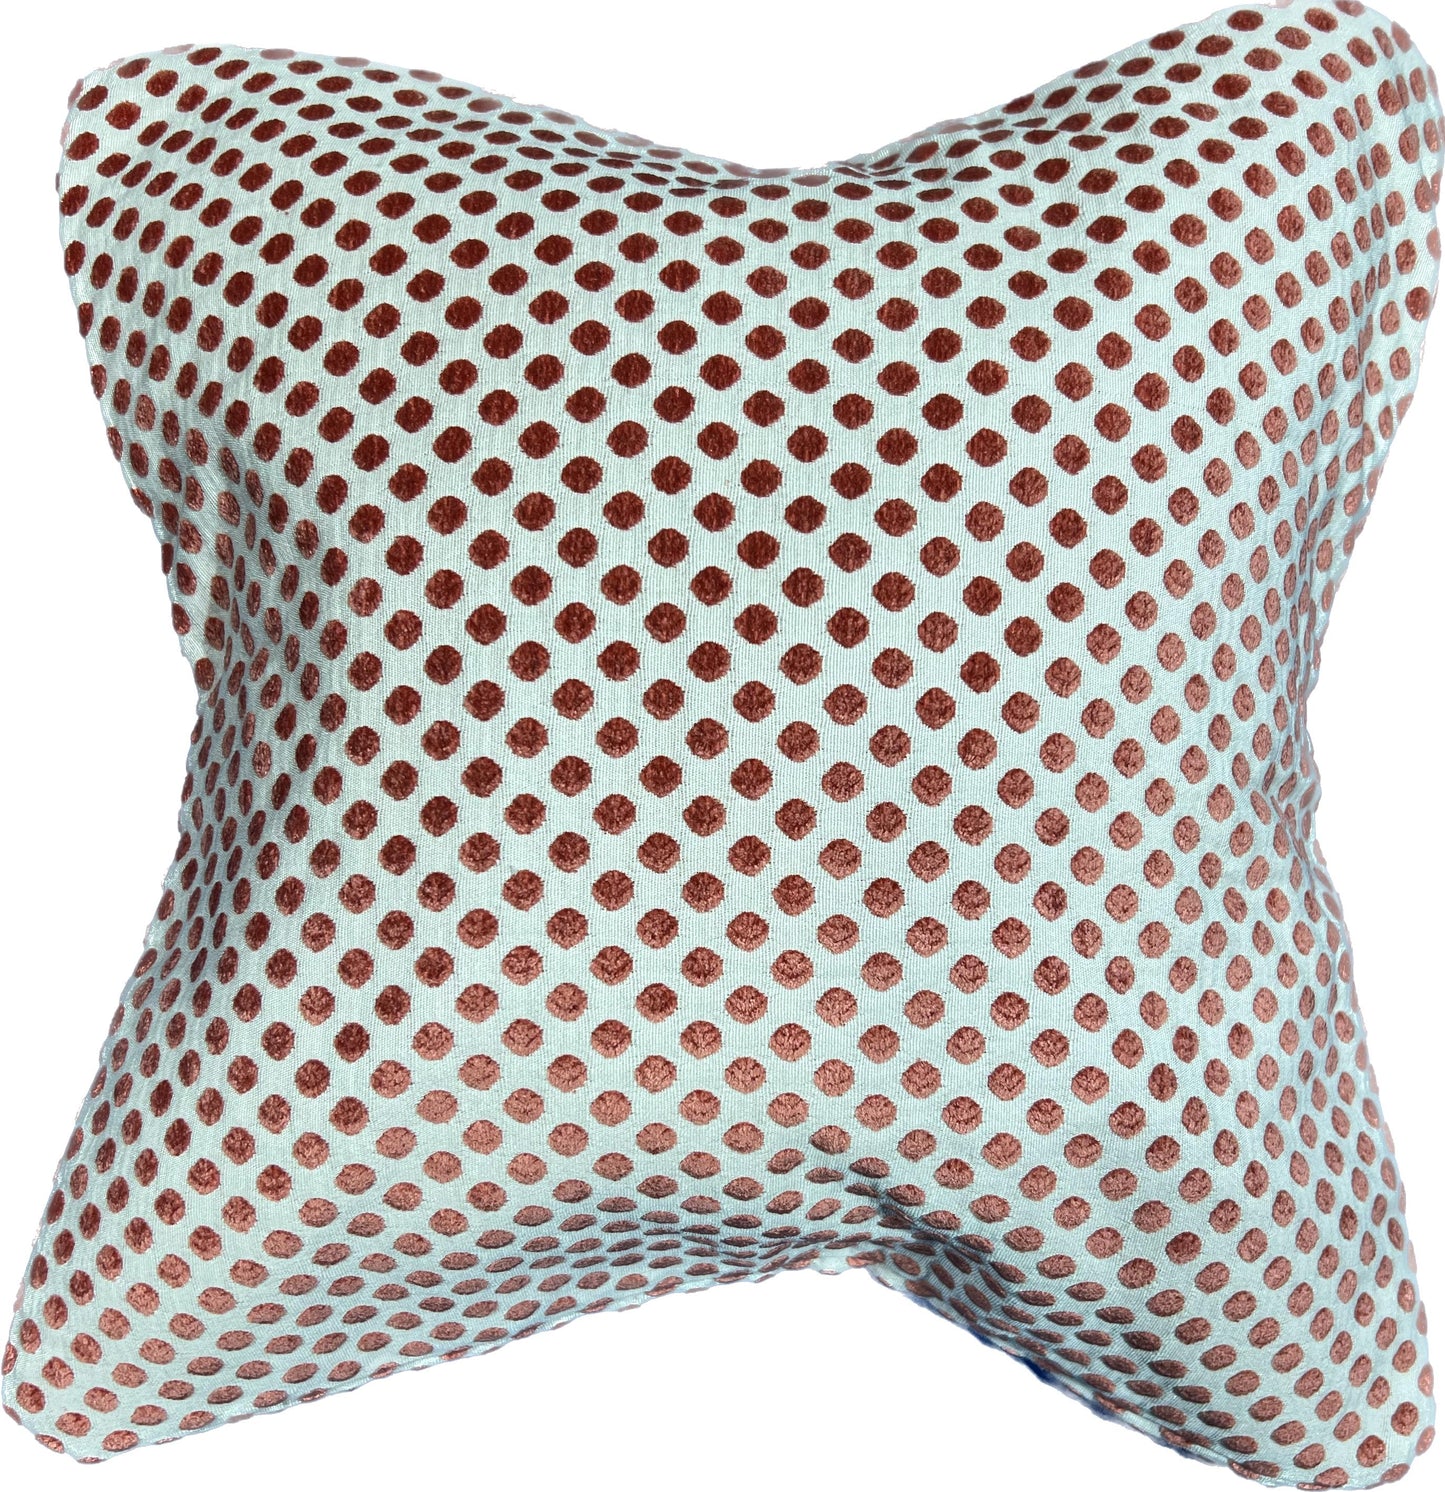 16"x16" Strawberry Dot Pillow Cover